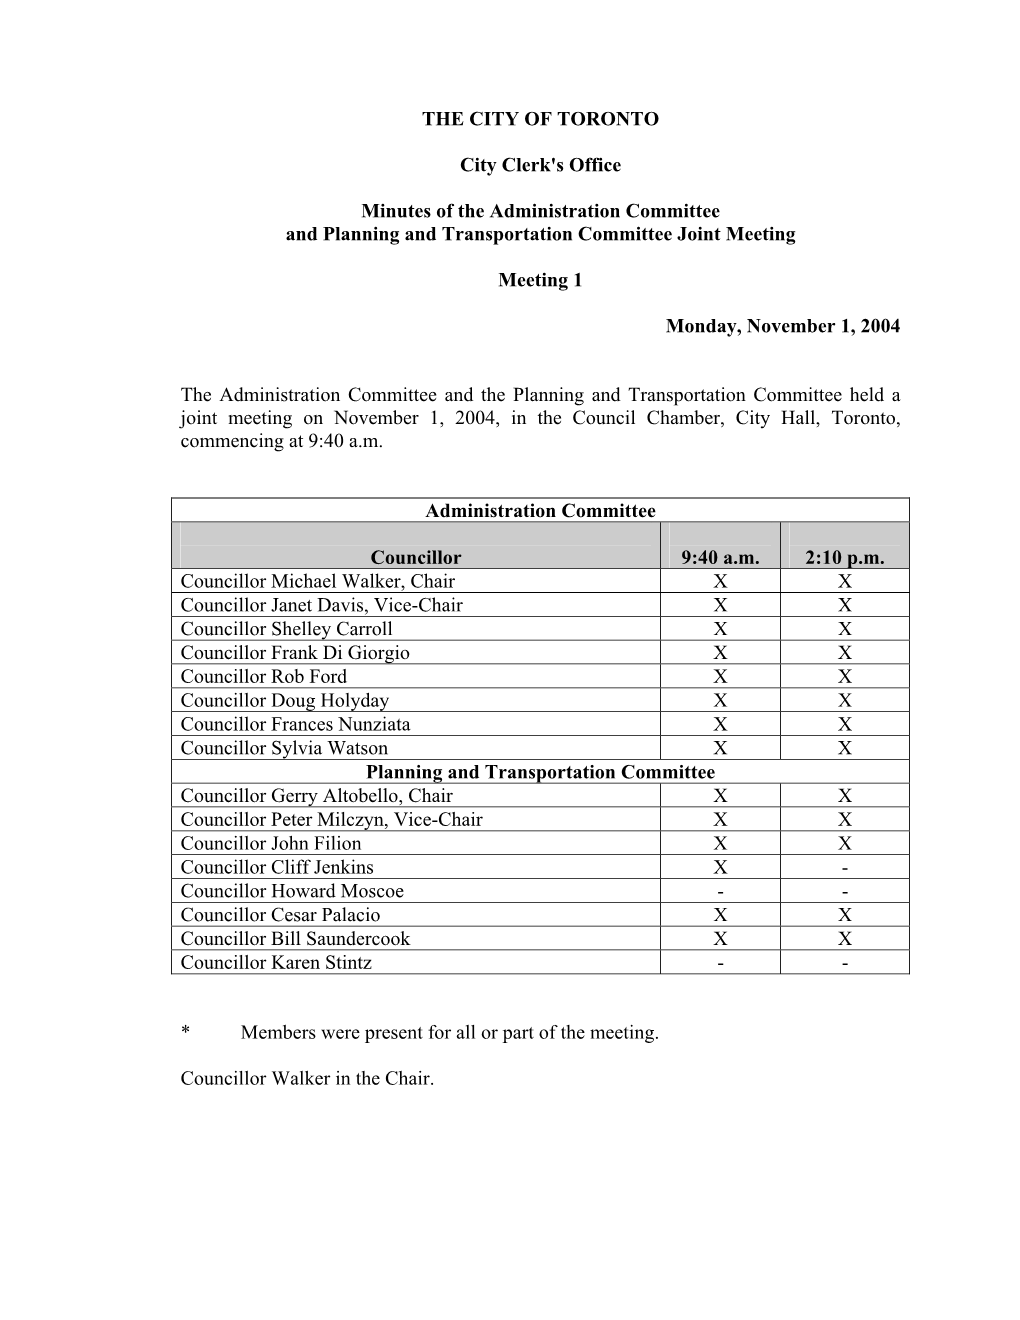 THE CITY of TORONTO City Clerk's Office Minutes of the Administration Committee and Planning and Transportation Committee Joint